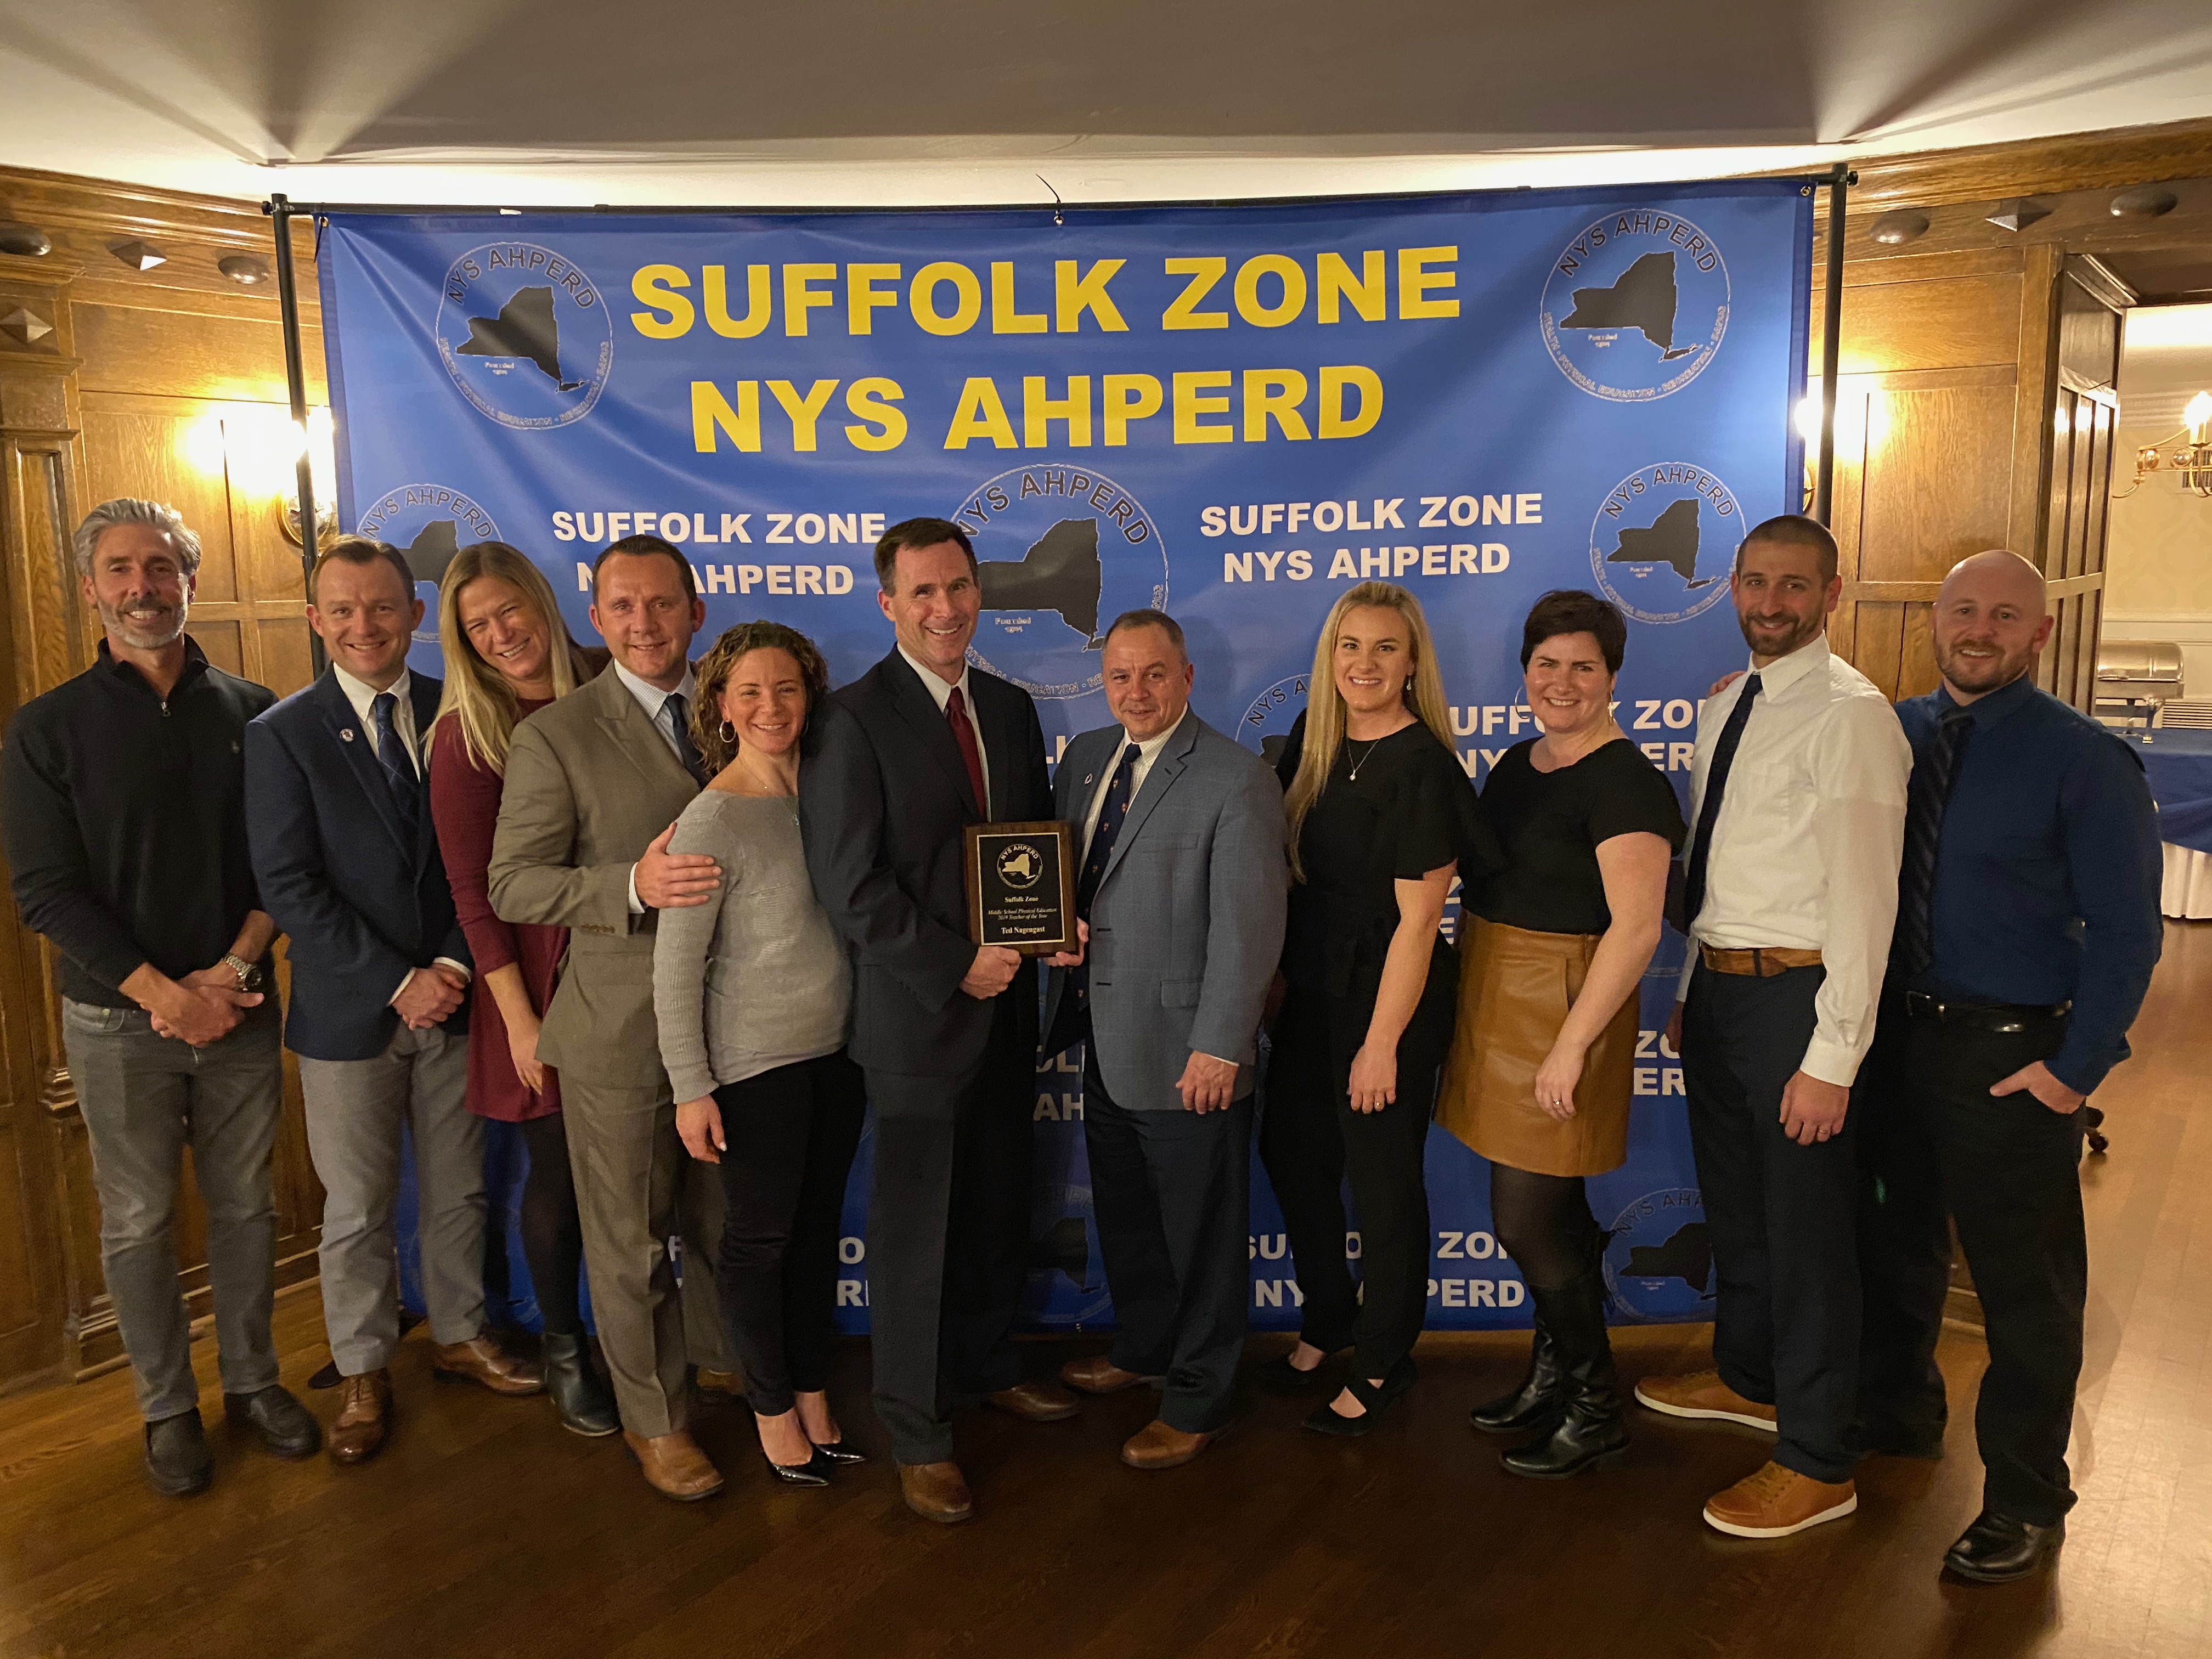 Ted Nagengast, 2019 Middle School Suffolk County Teacher of the Year